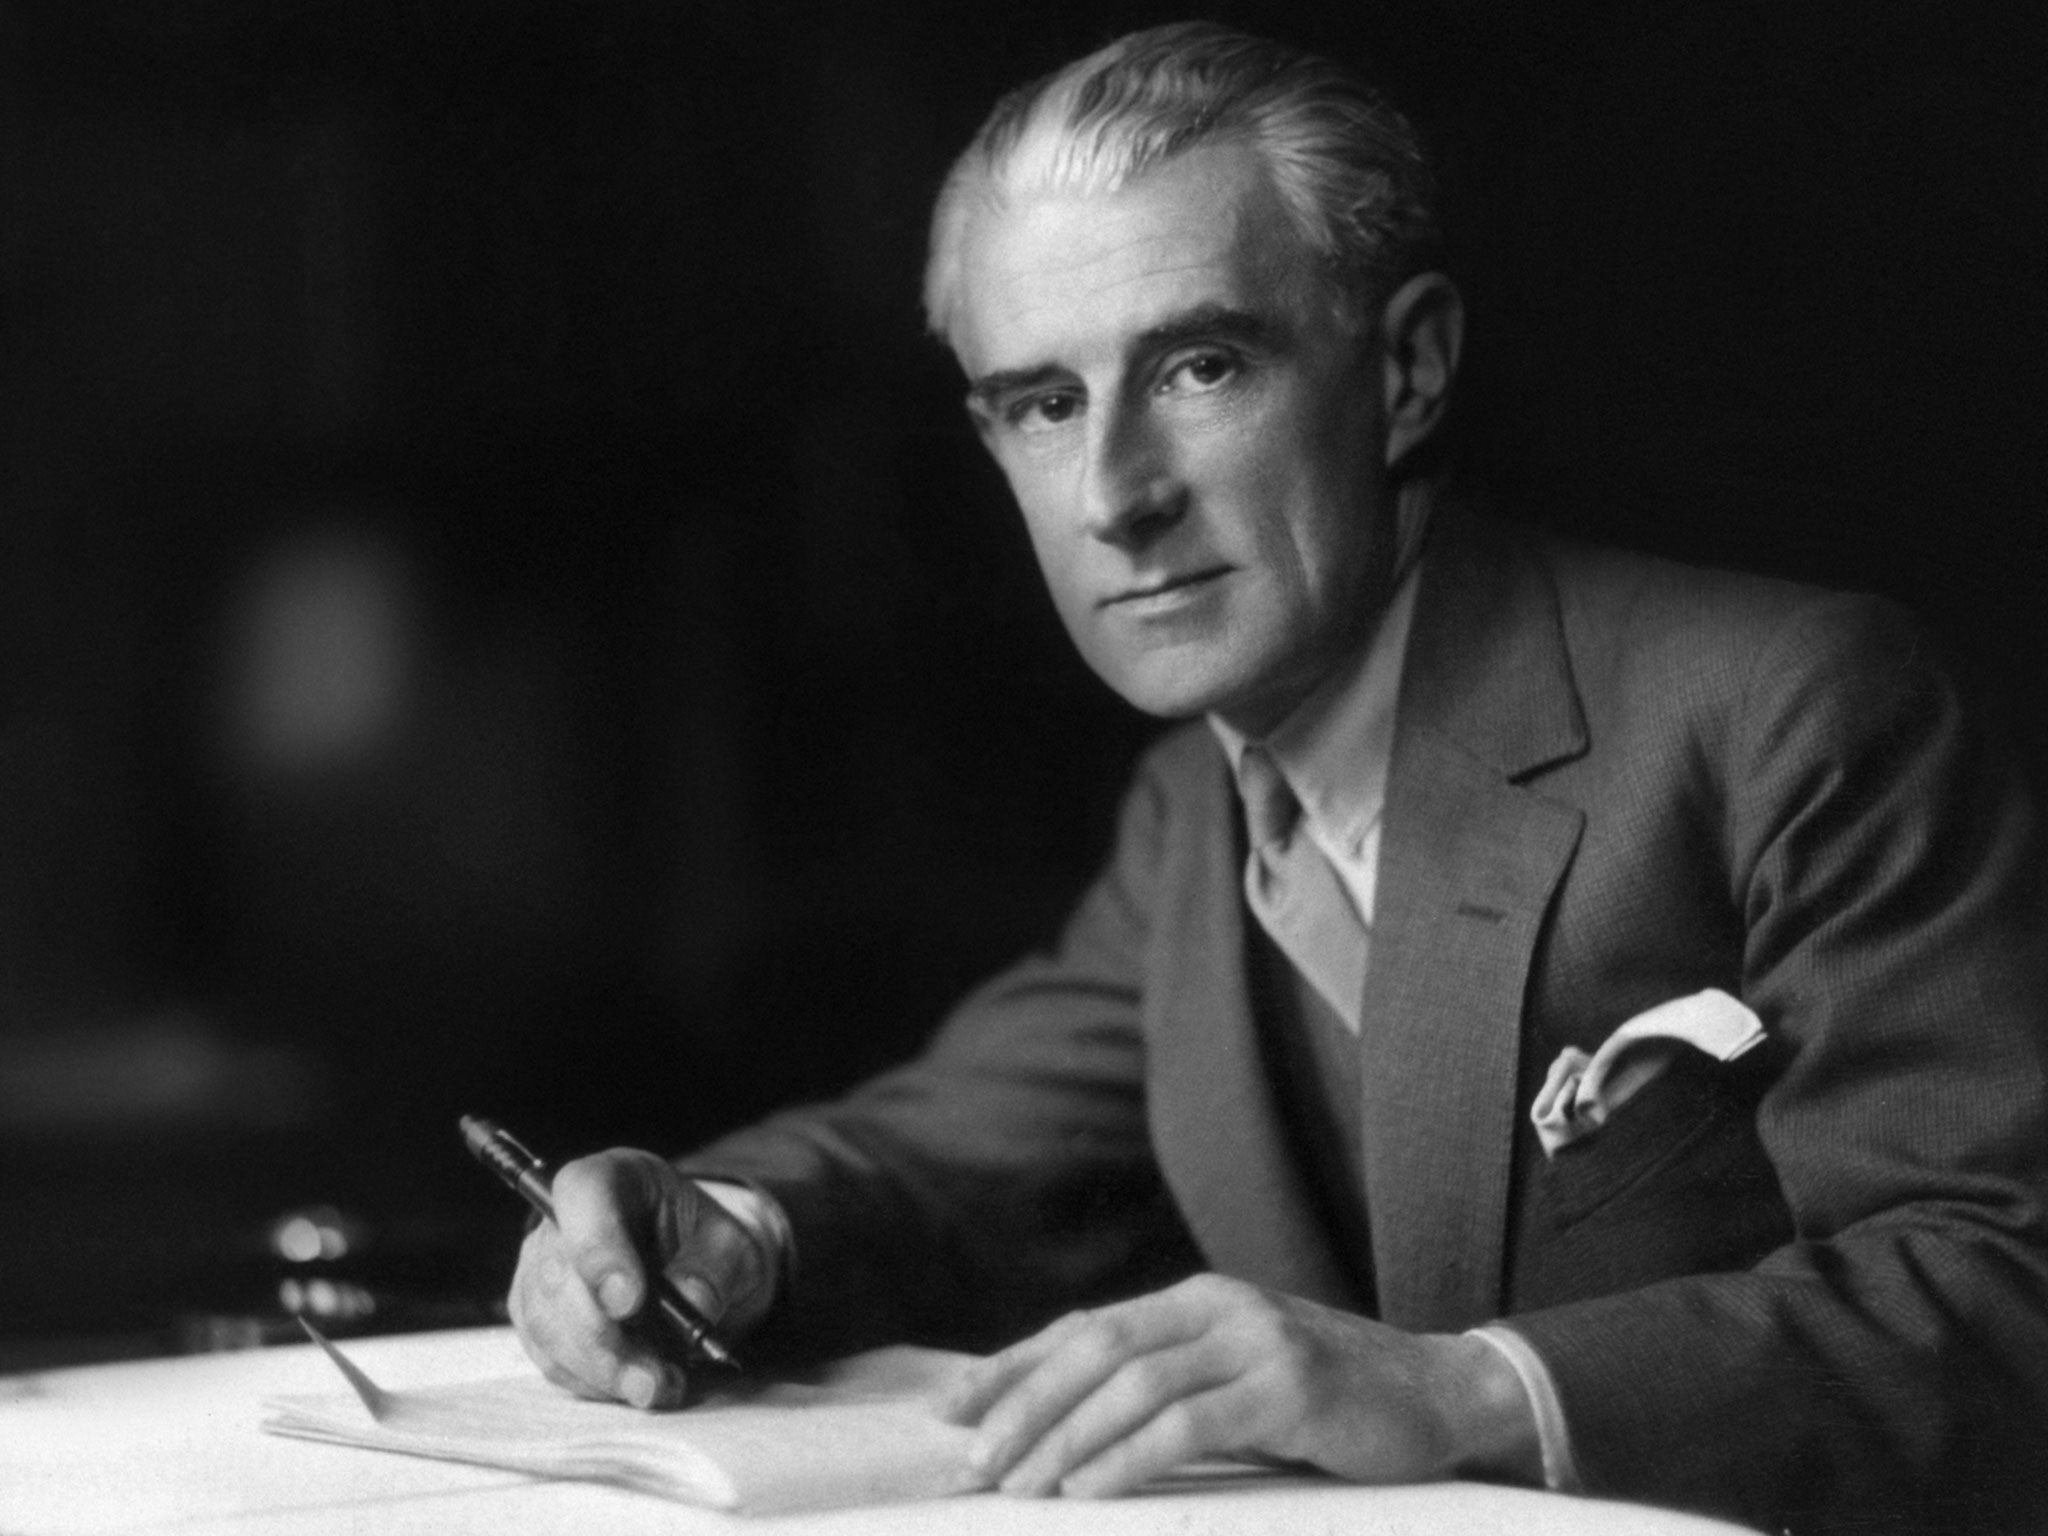 The composer of Bolero, Maurice Ravel, who died in 1937